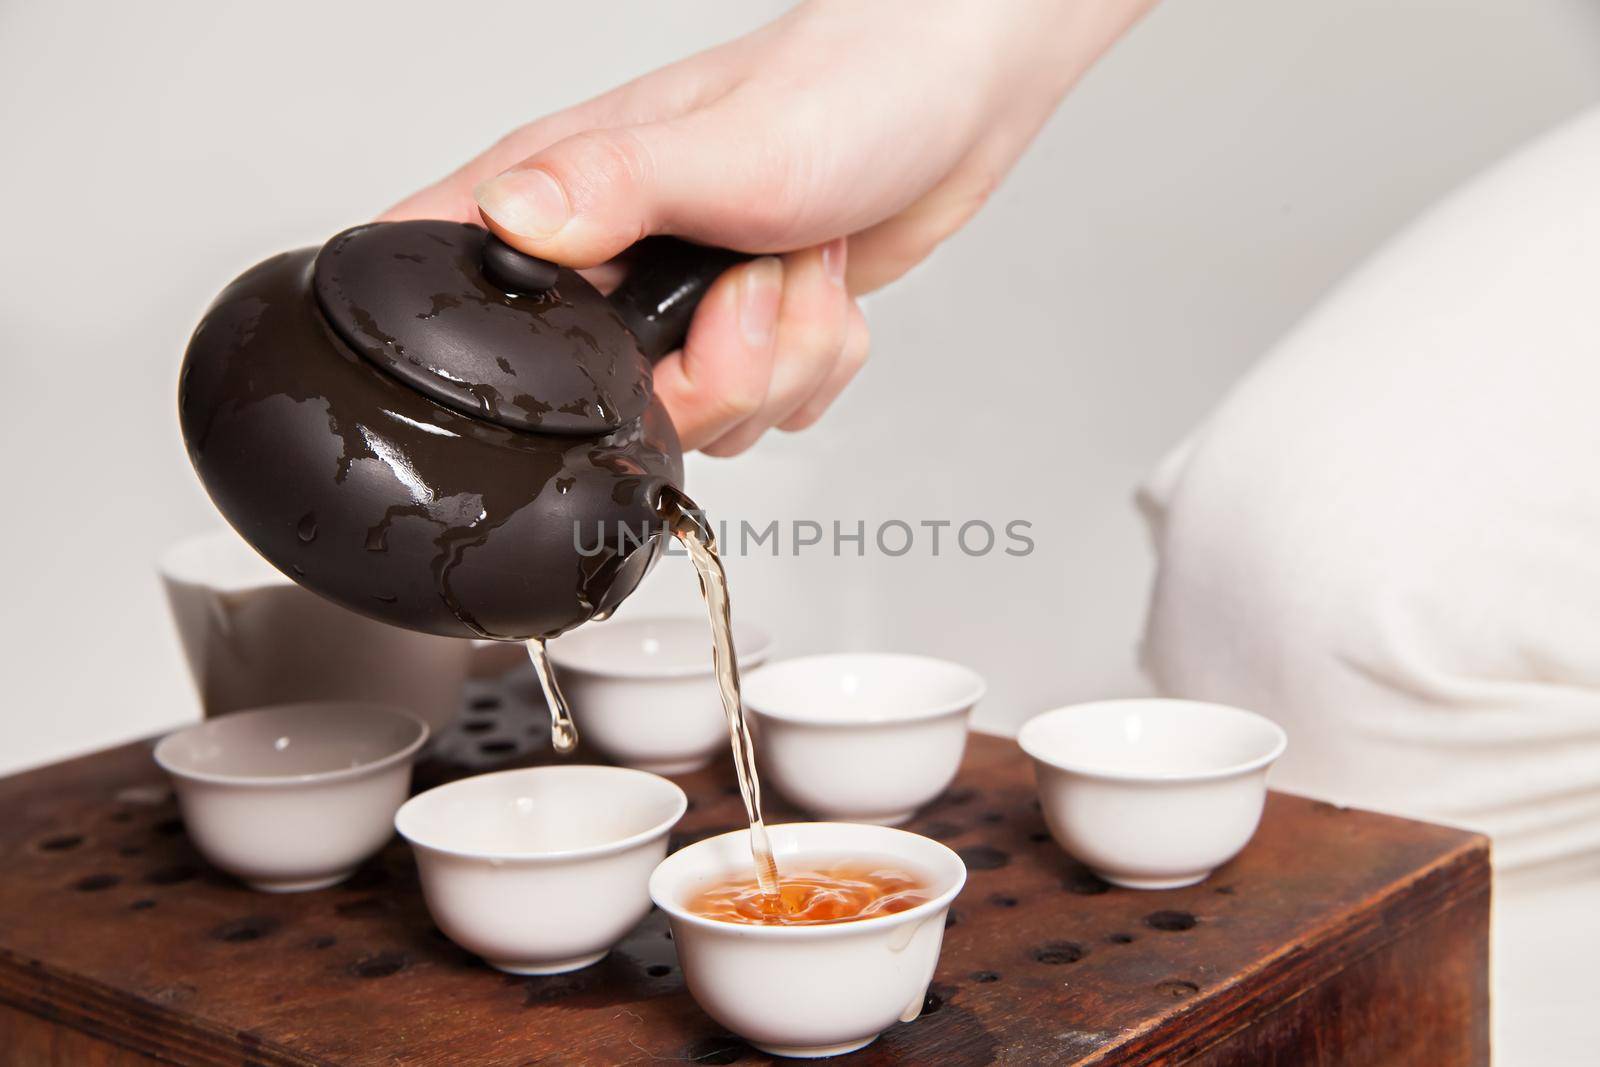 Chinese tea ceremony is perfomed by tea master in kimono